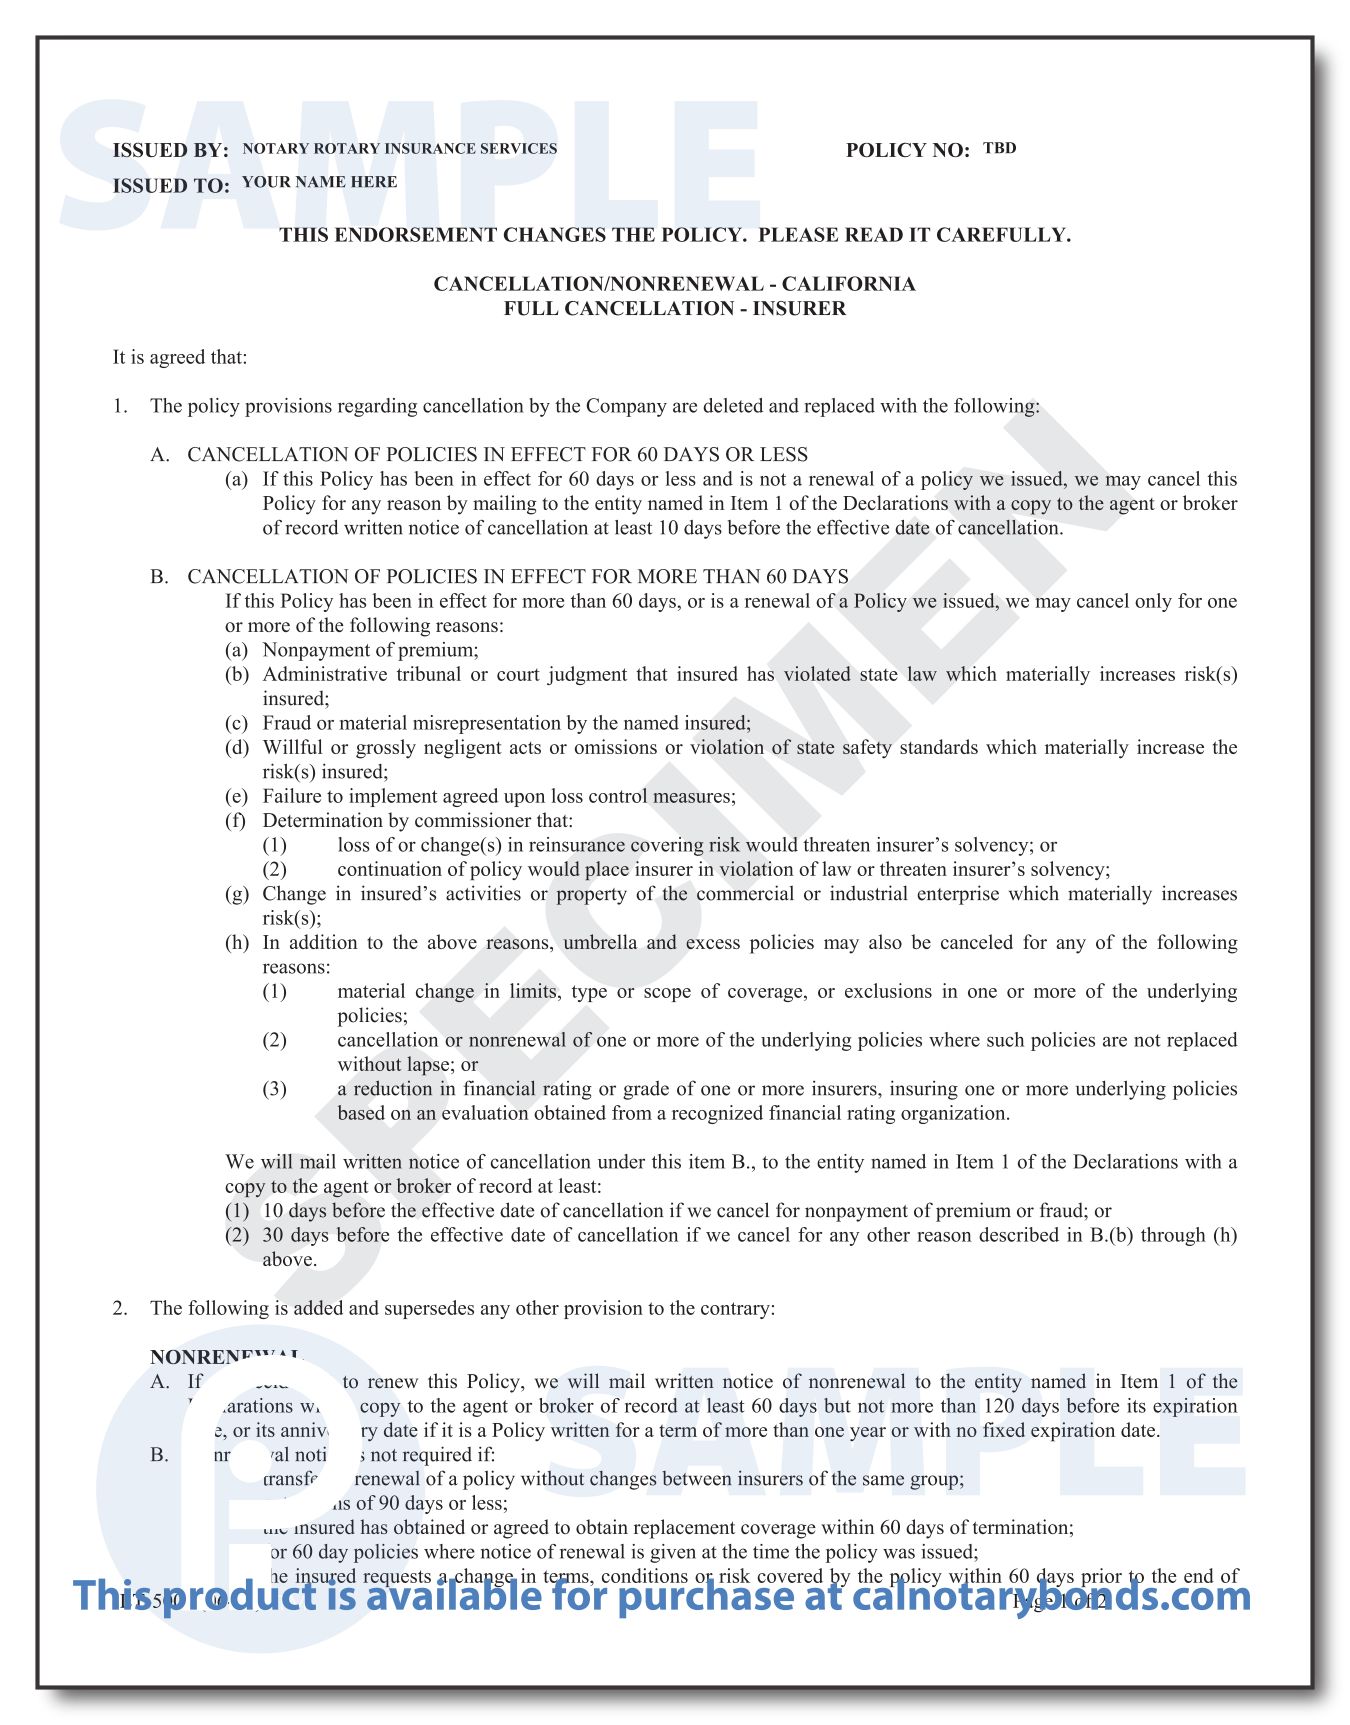 California Notary Errors and Omissions Policy - Travelers - Page 2